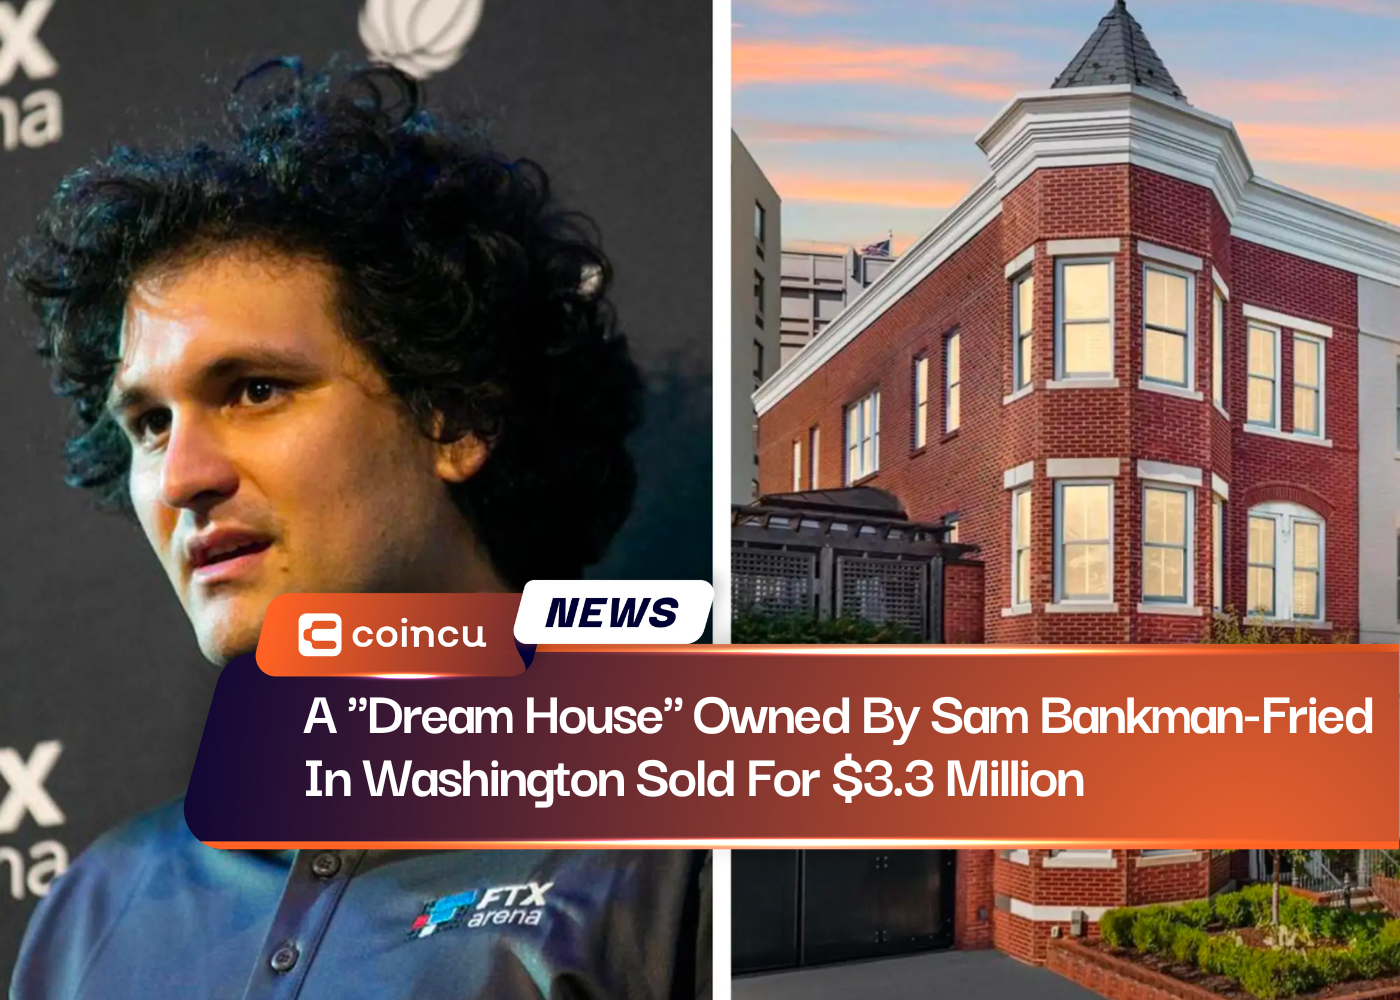 A "Dream House" Owned By Sam Bankman-Fried In Washington Sold For $3.3 Million